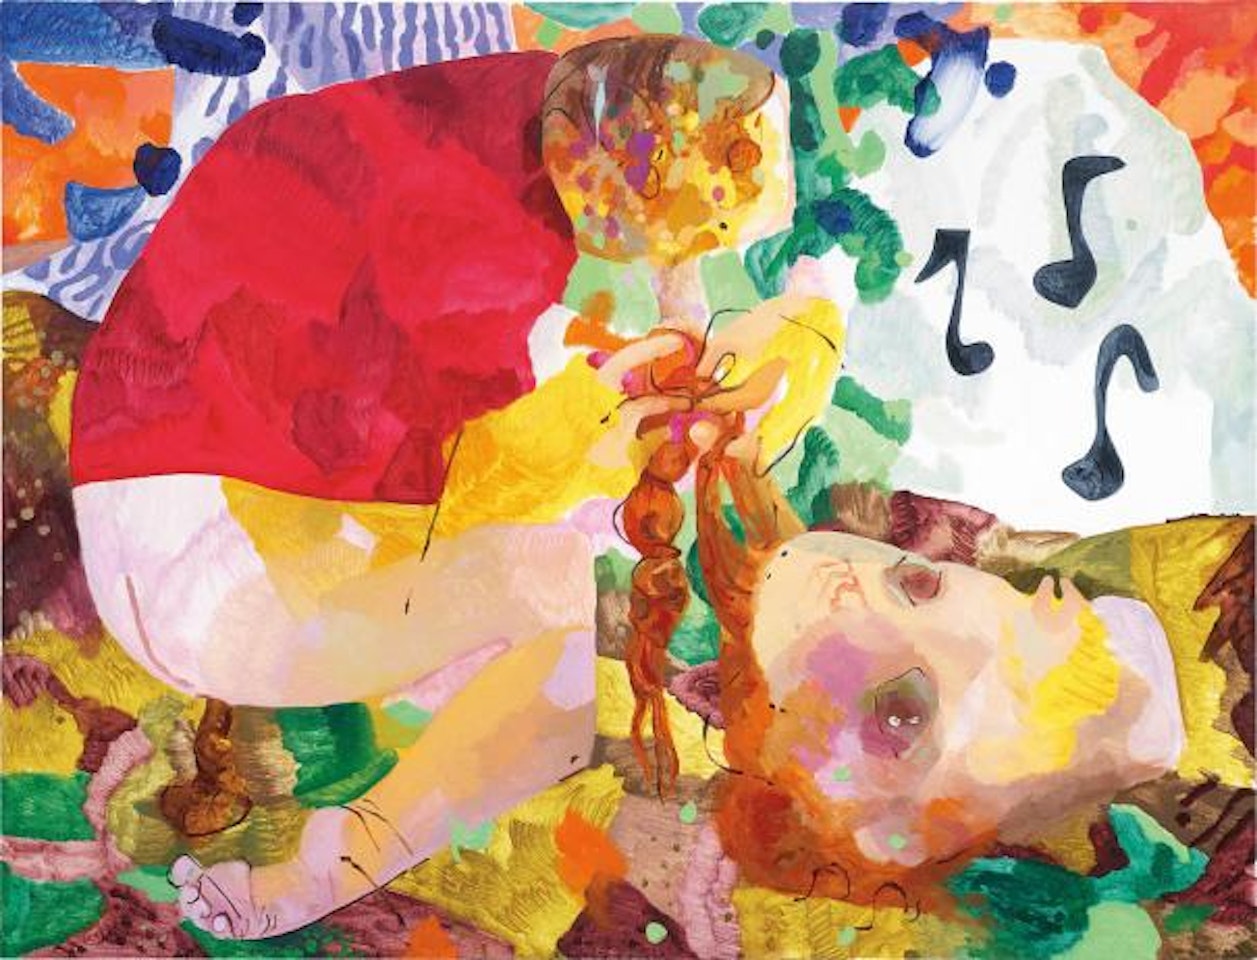 Crapping, Braiding and Whistling by Dana Schutz